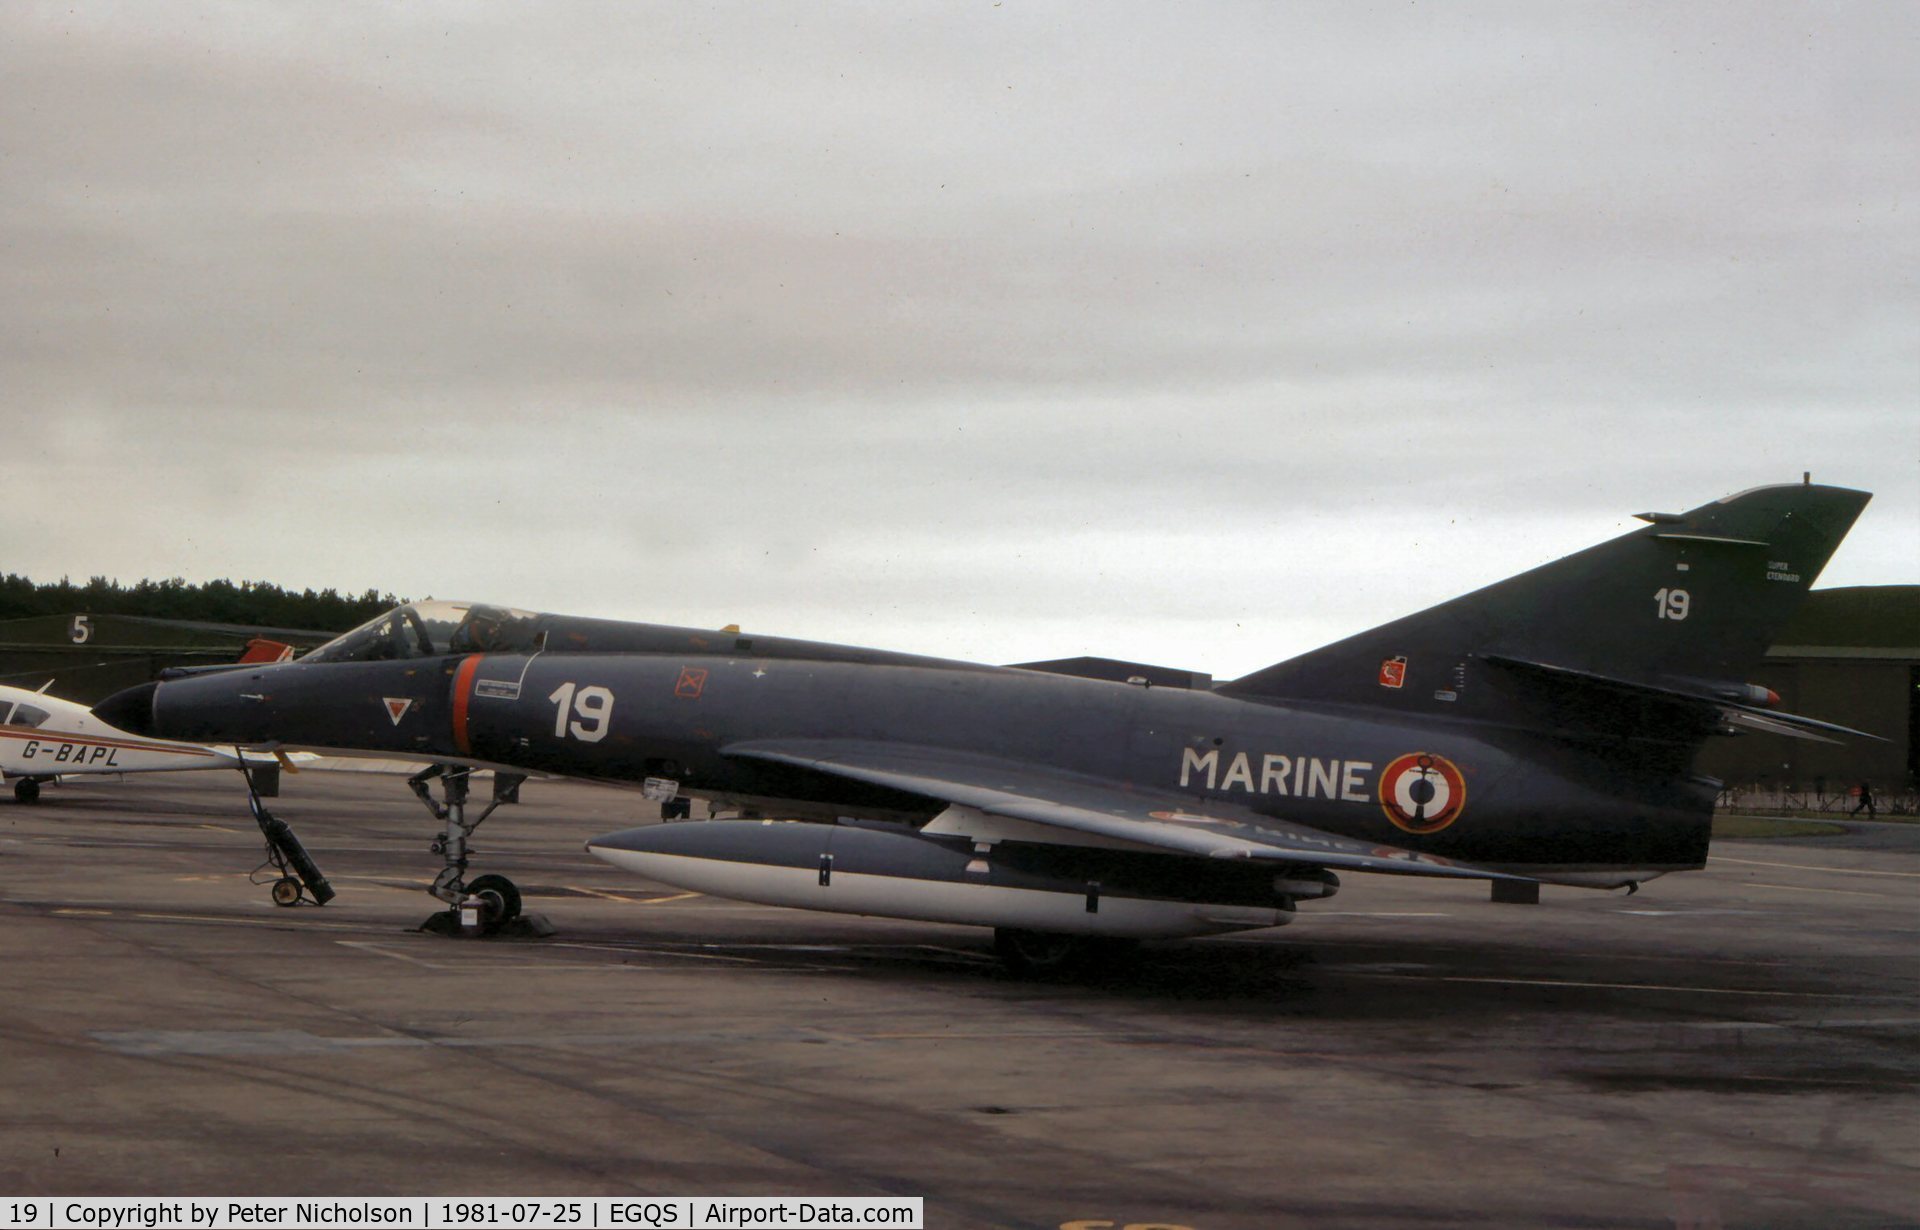 19, Dassault Super Etendard C/N 19, Another view of the 11 Flotille Super Etendard on display at the 1981 RAF Lossiemouth Airshow.